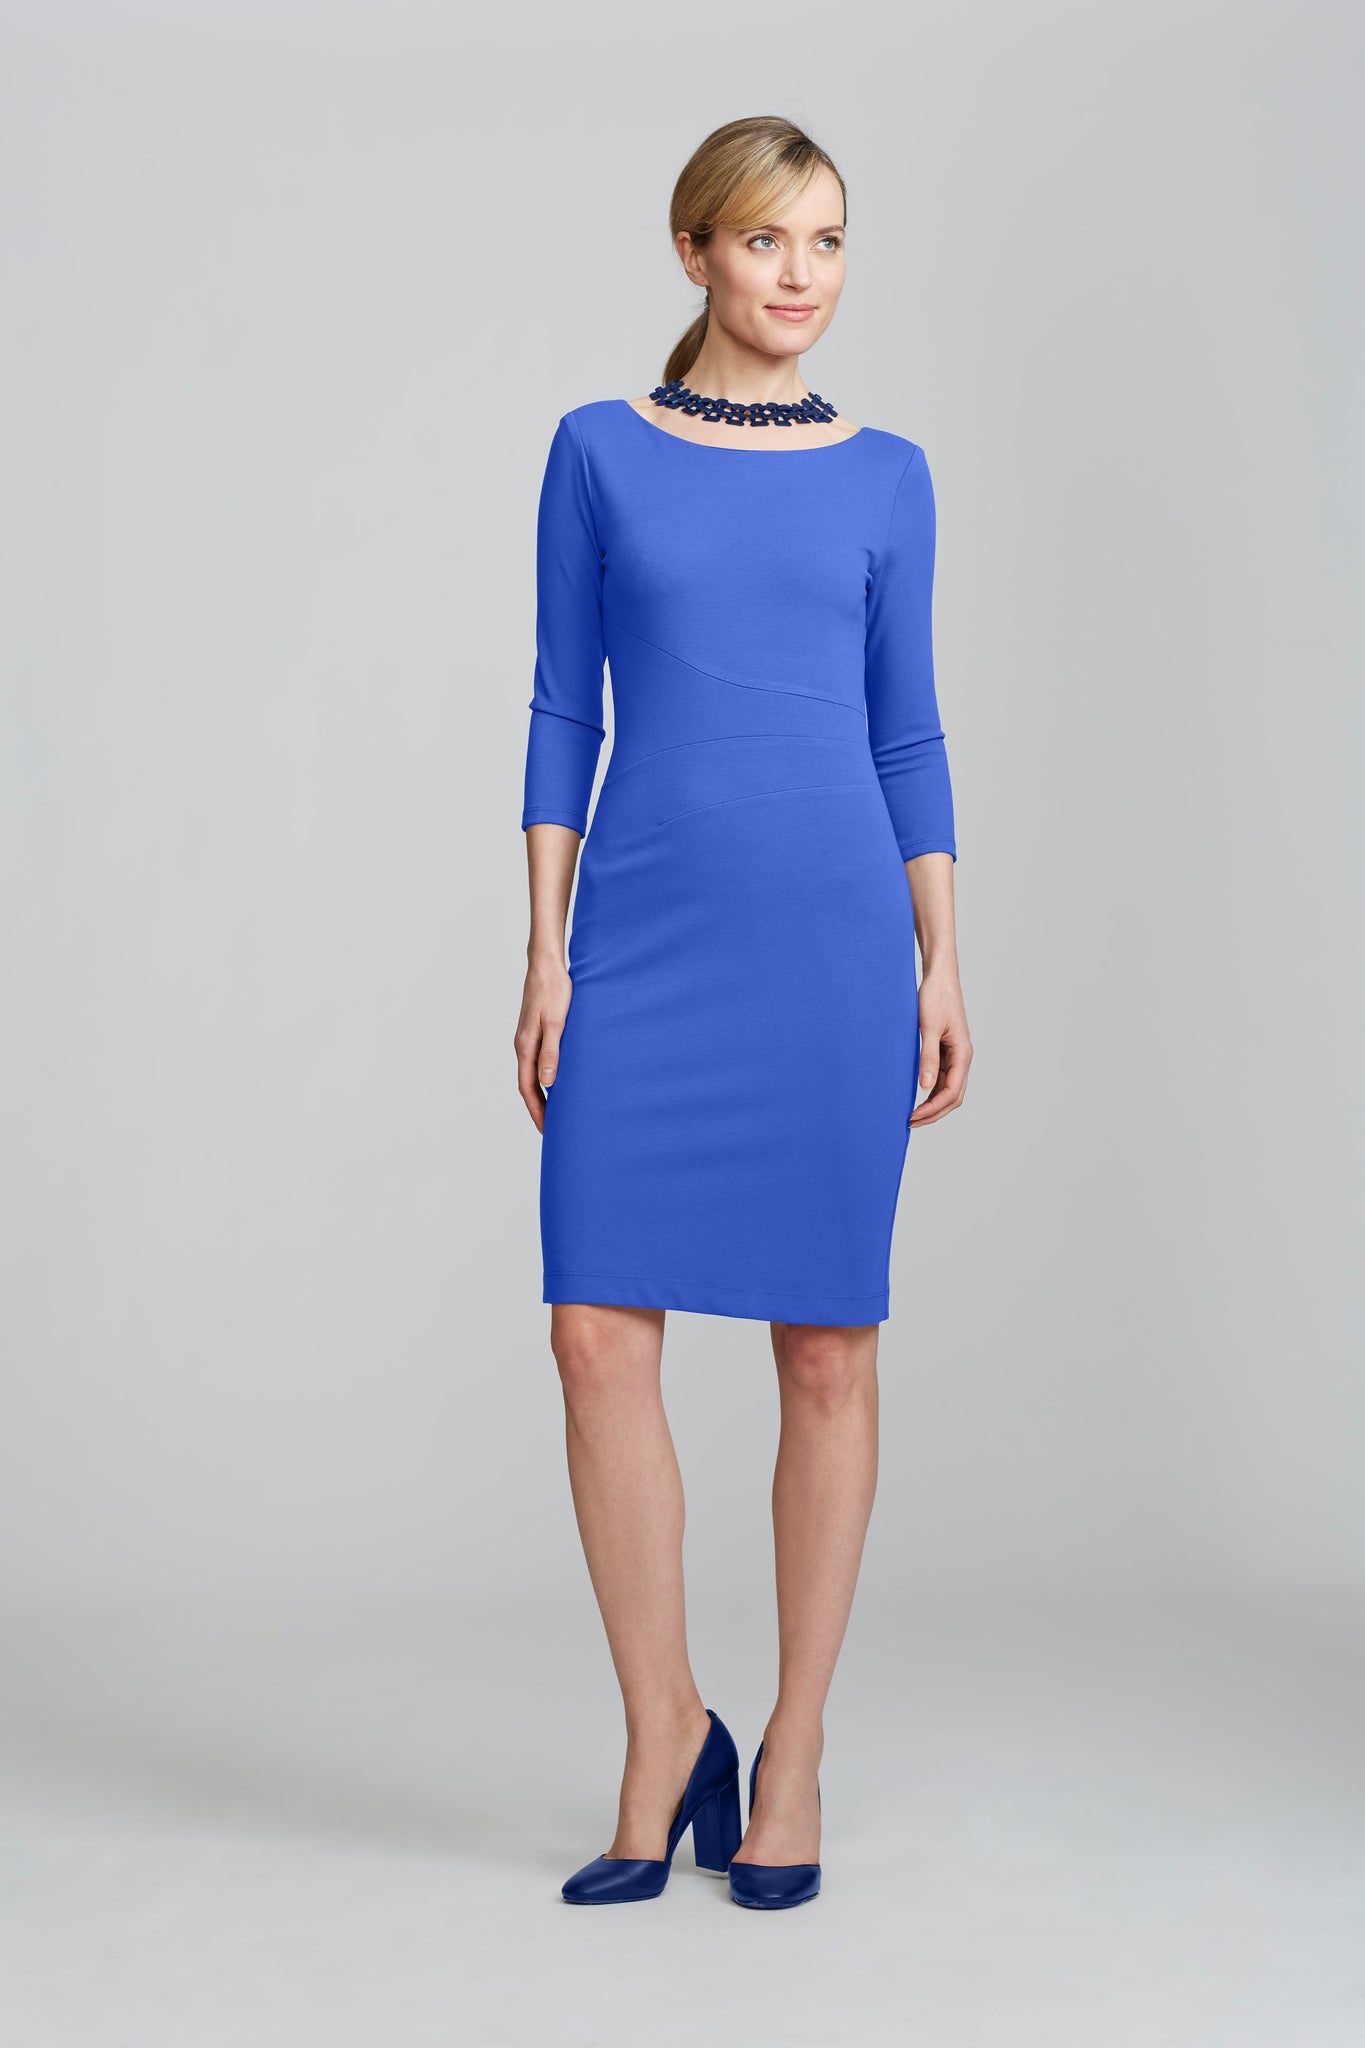 Women' Business Lydia Dress - Lapis Blue NORA GARDNER | OFFICIAL STORE for work and office